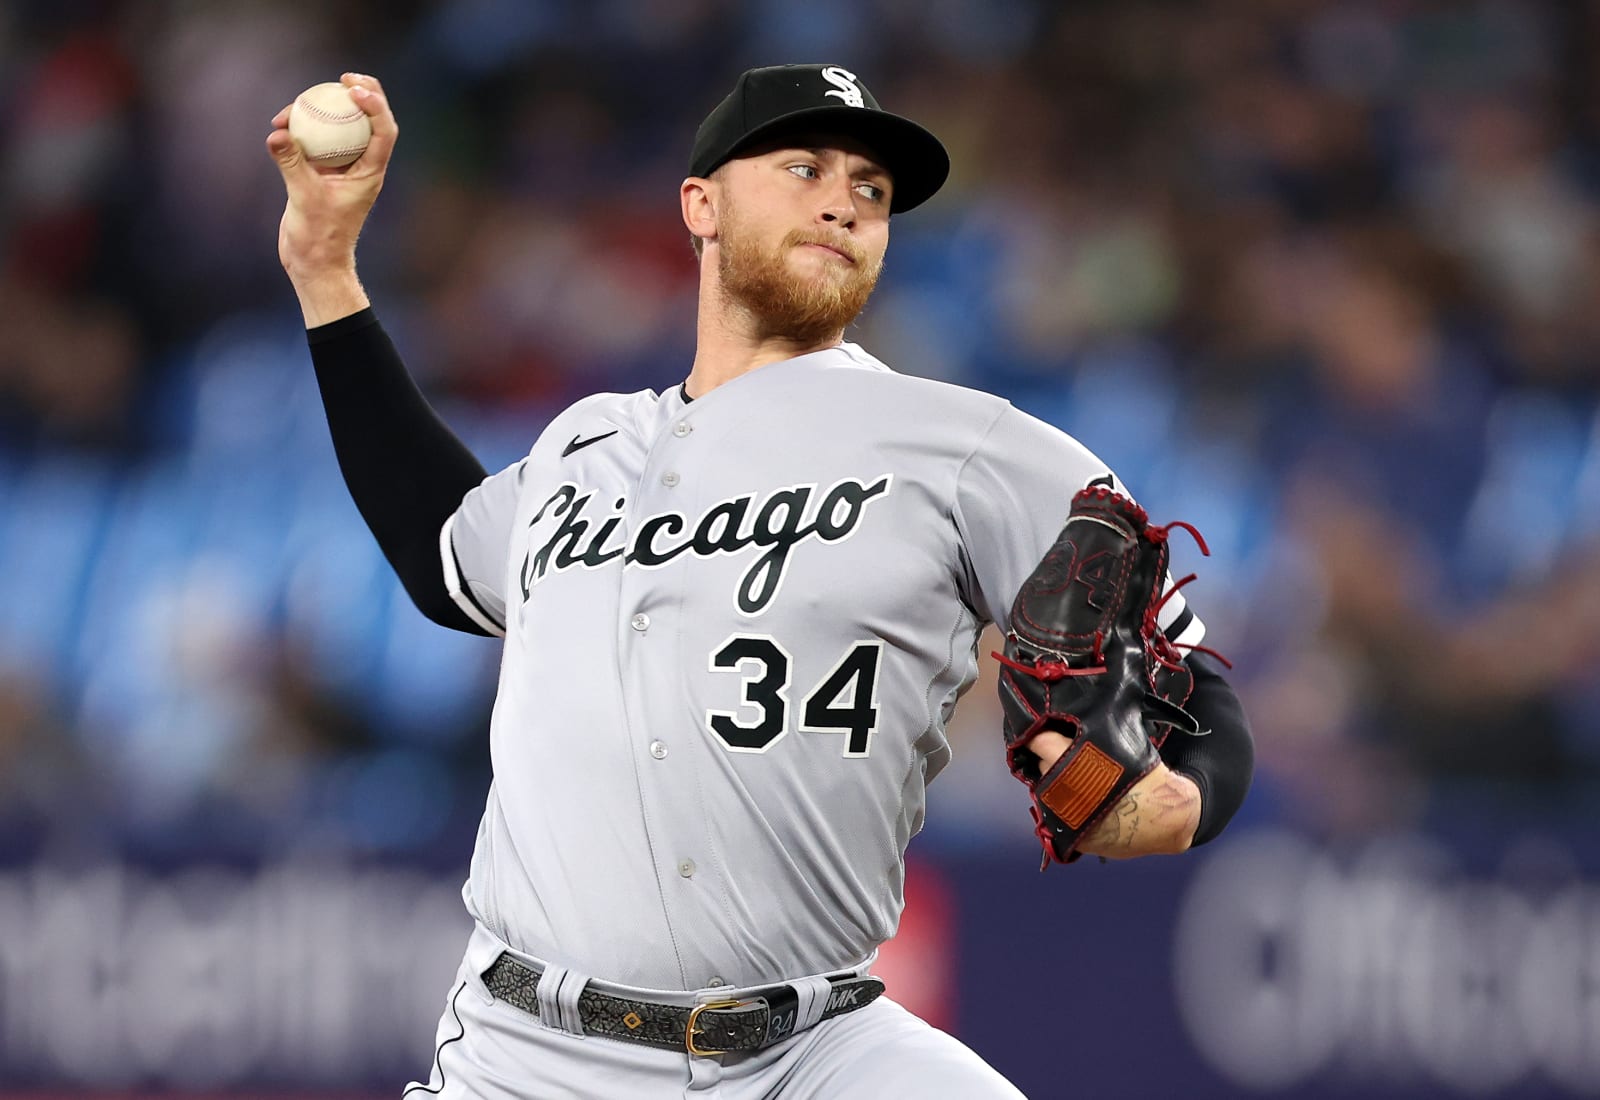 White Sox' Michael Kopech gives up 1 hit in dominant 8 inning